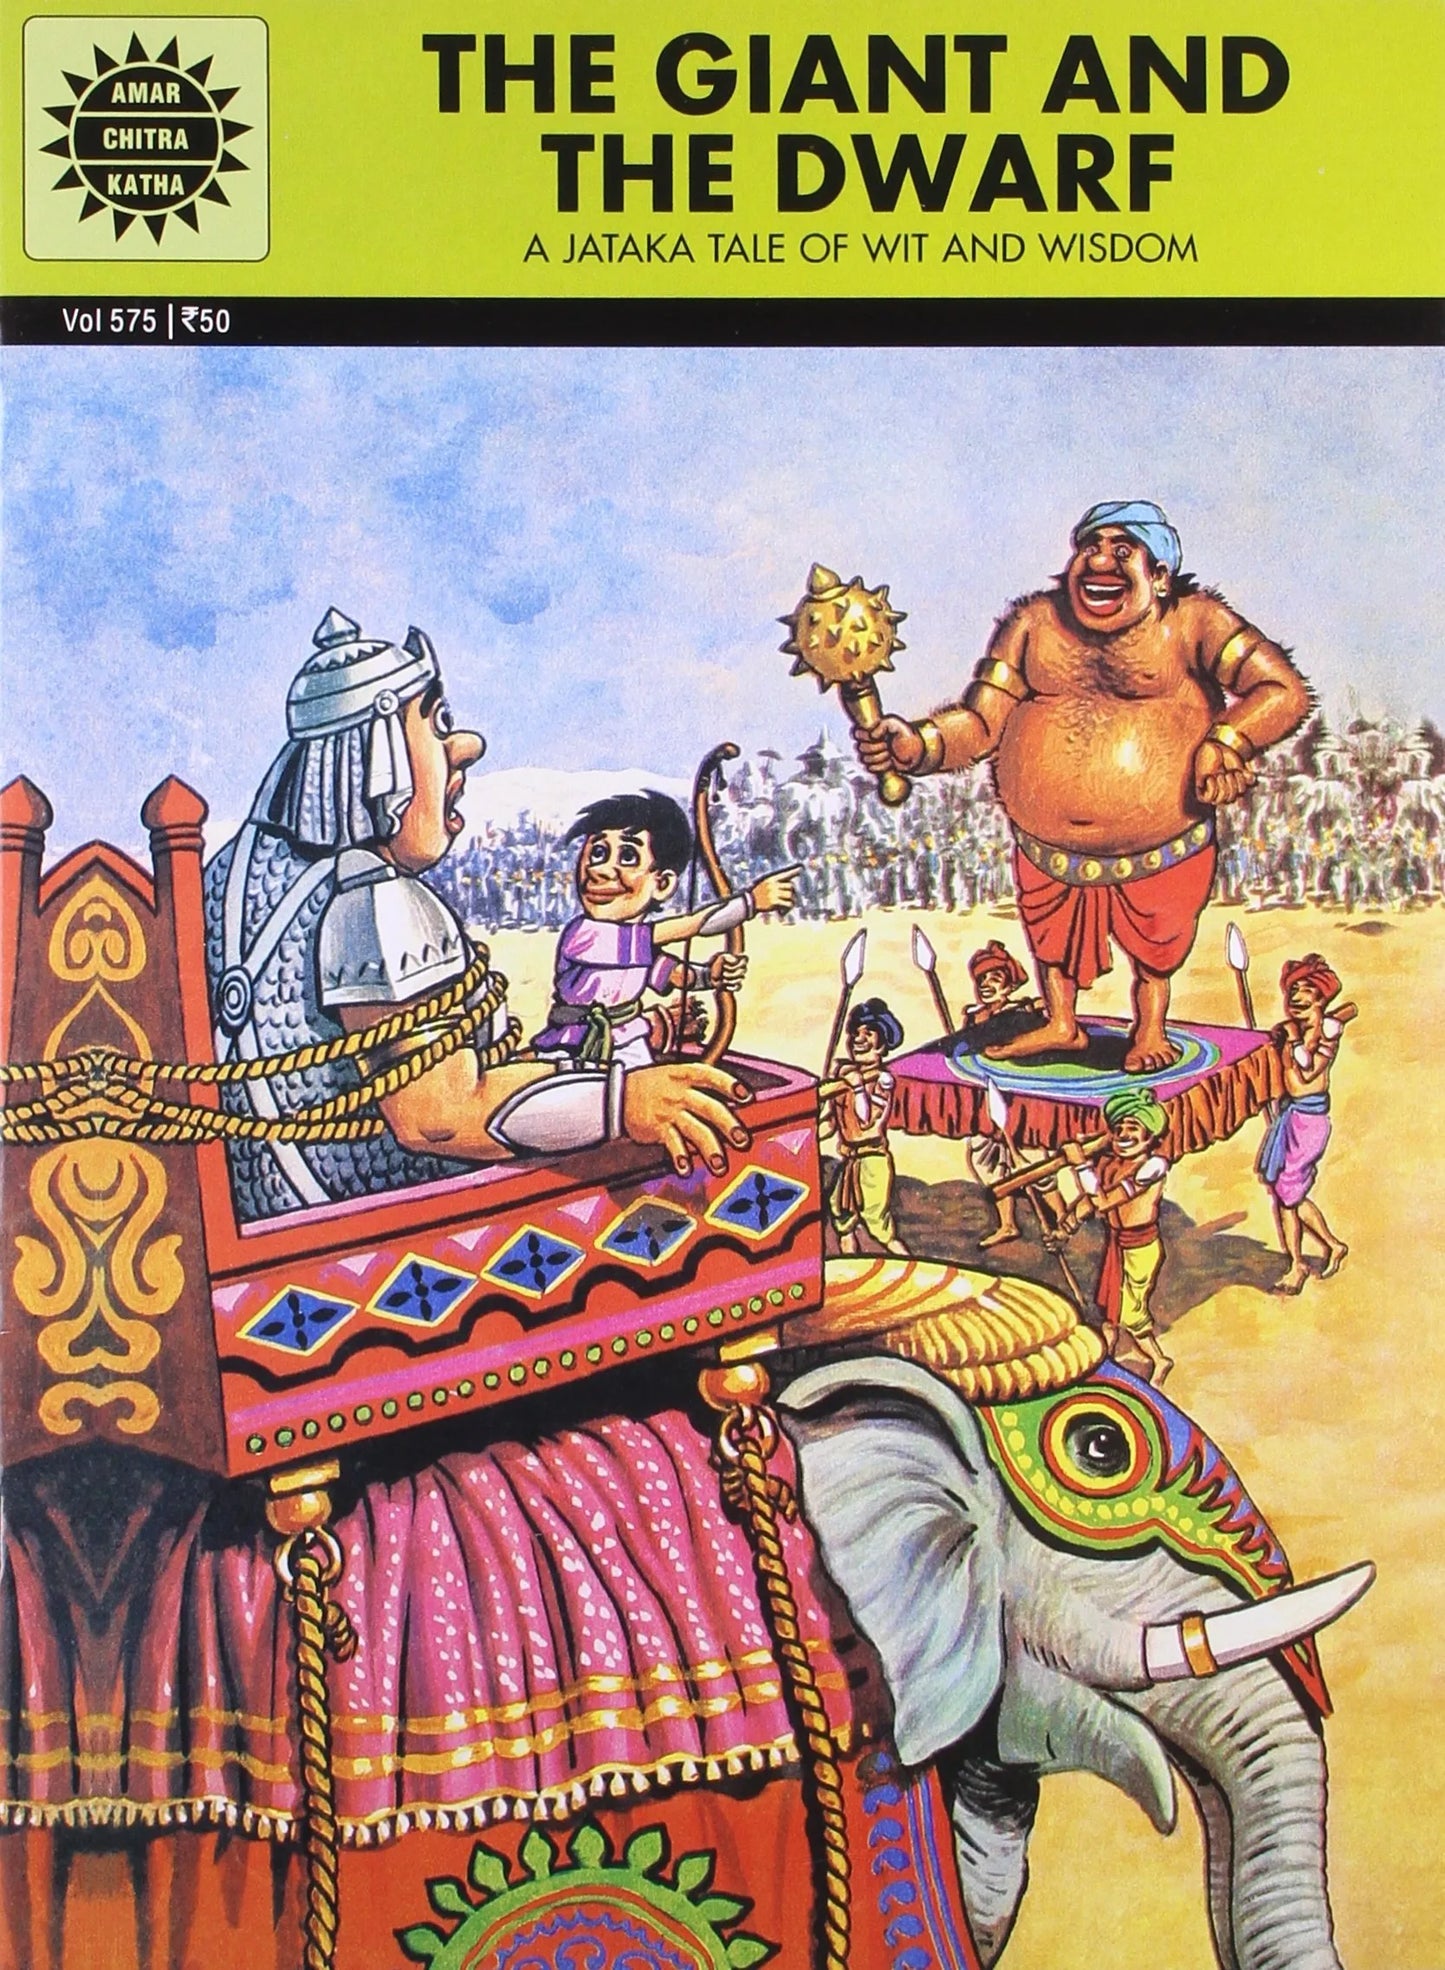 Amar Chitra Katha - The Giant And The Dwarf - The Jataka Tales of Wit and Wisdom